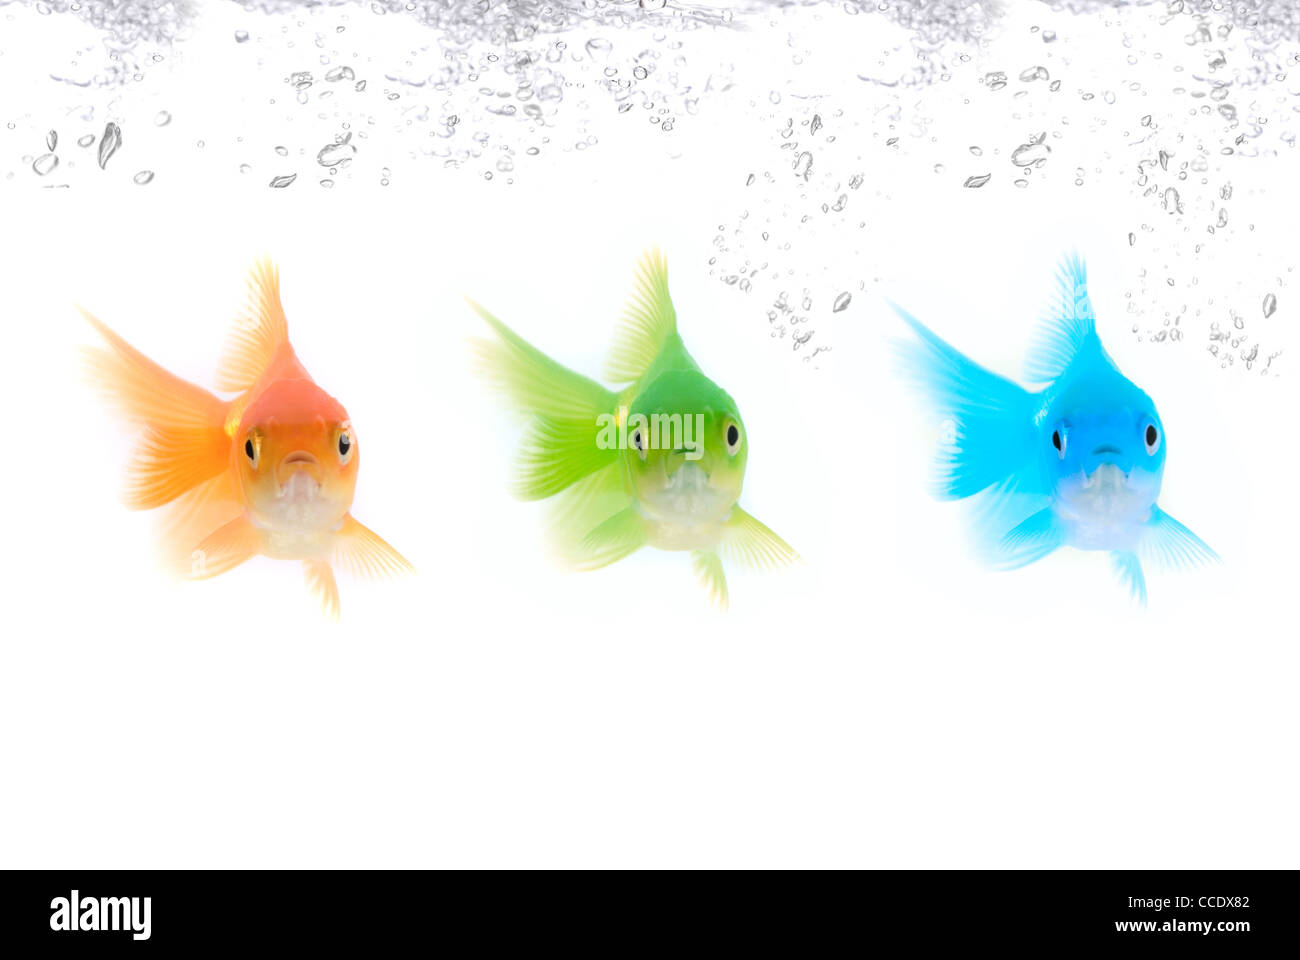 Two Toy Fishes Different Colors Isolated Stock Photo 59936980